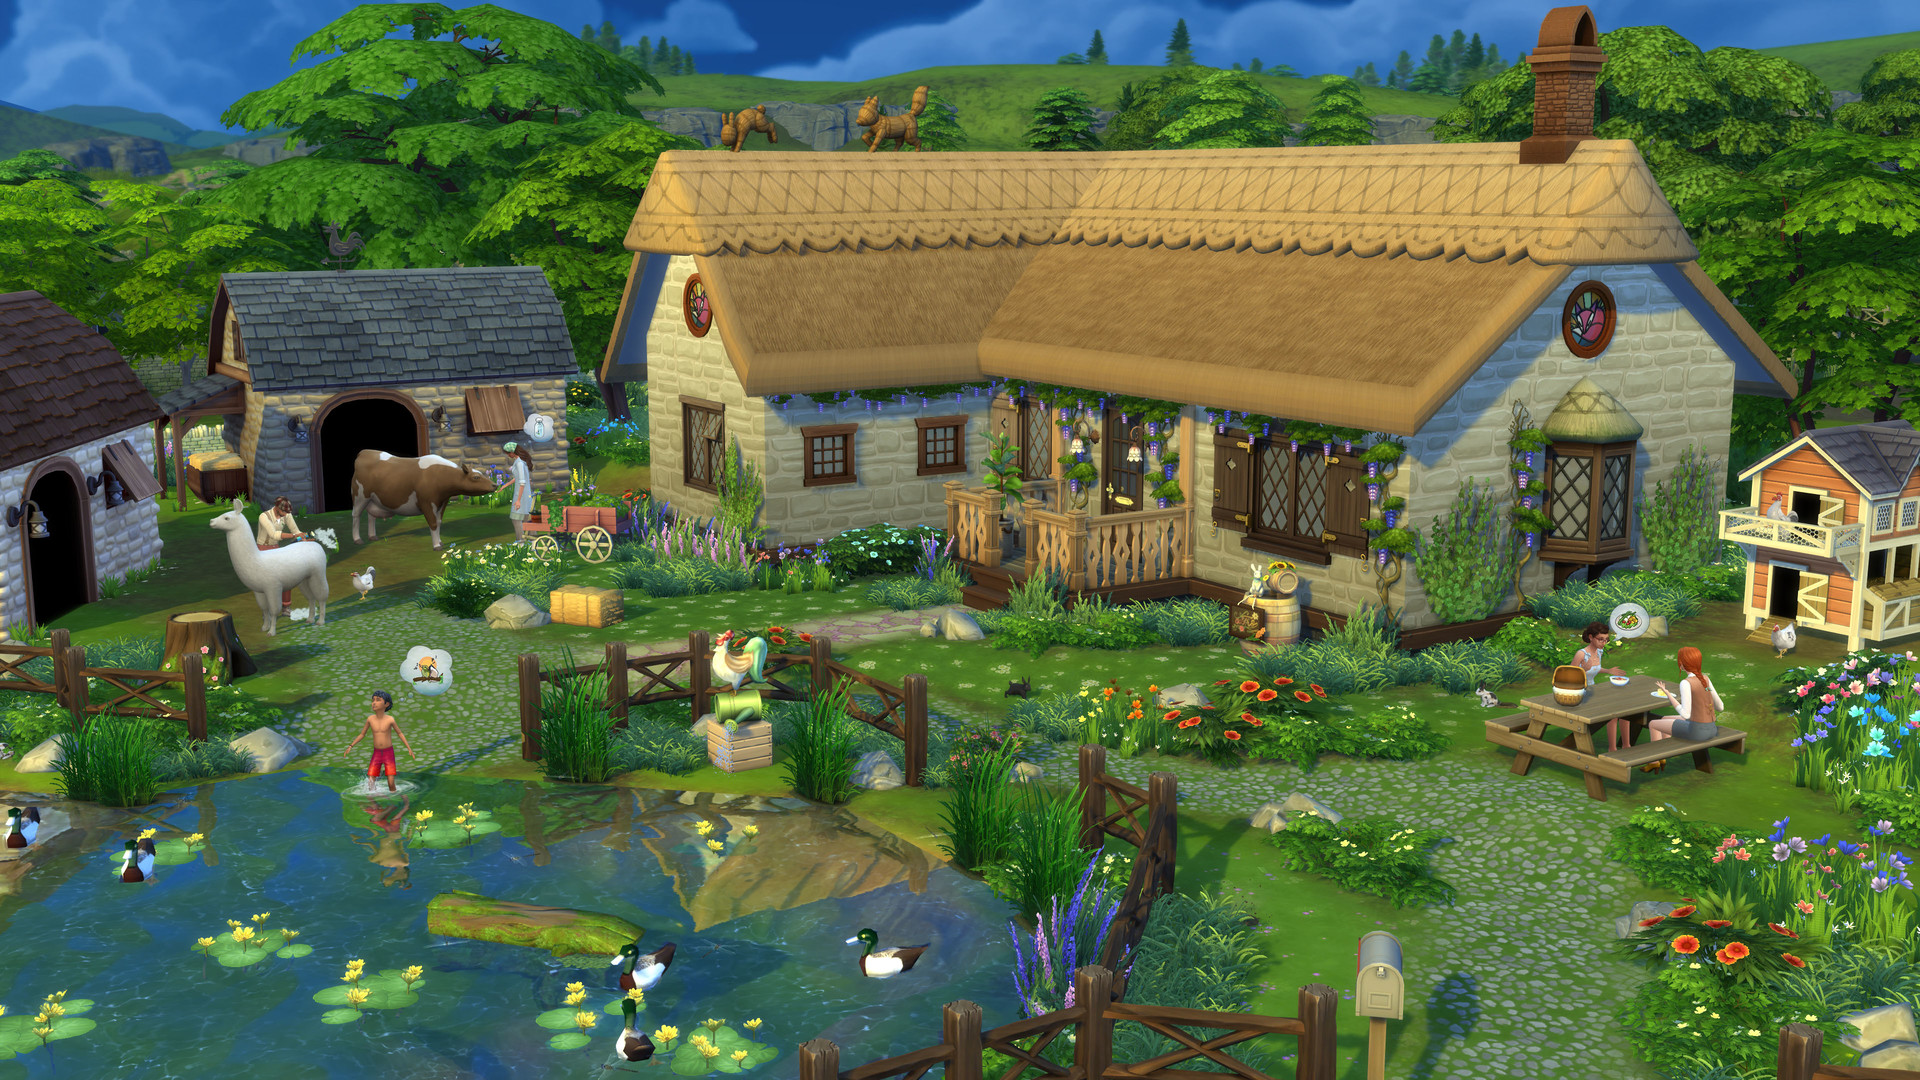 The Sims 4 - Cottage Living DLC XBOX One CD Key